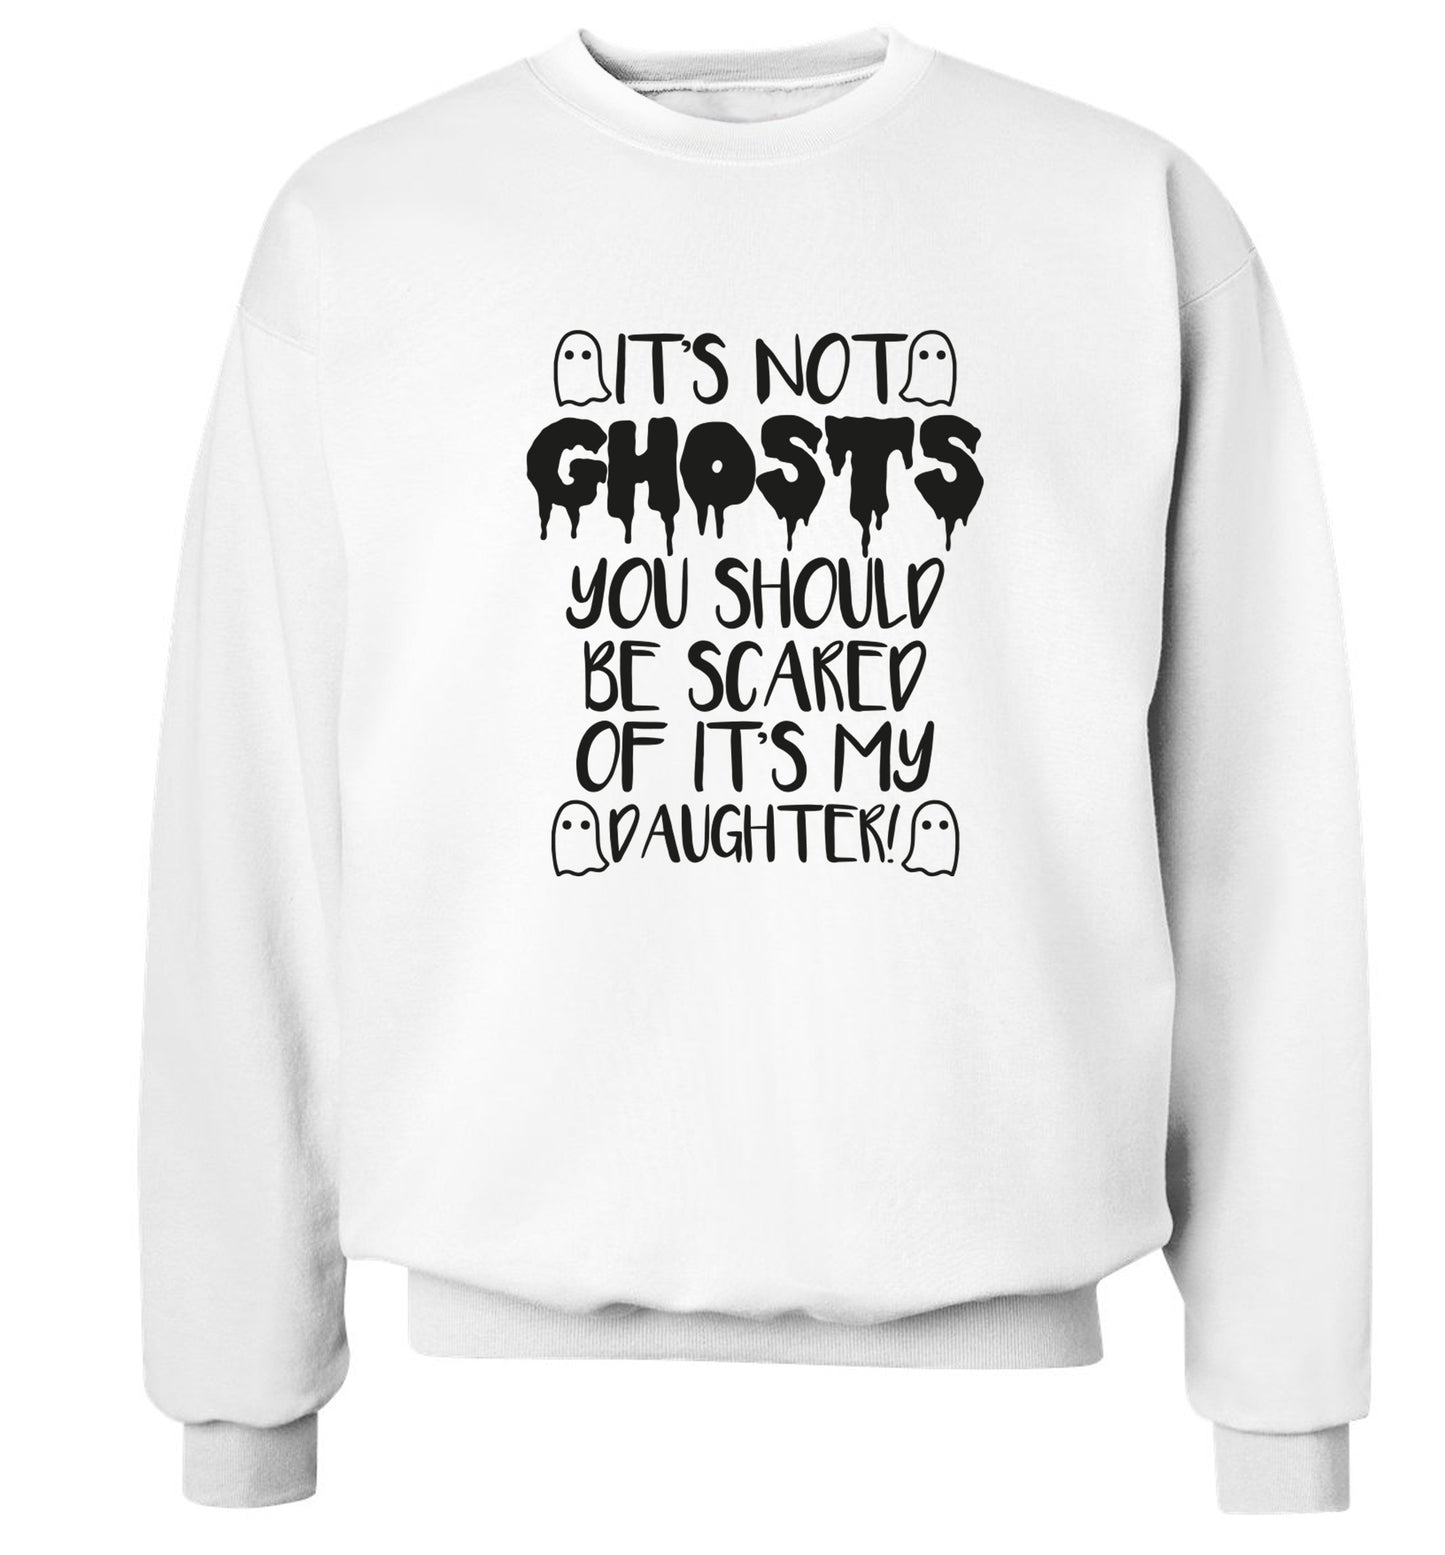 It's not ghosts you should be scared of it's my daughter! Adult's unisex white Sweater 2XL